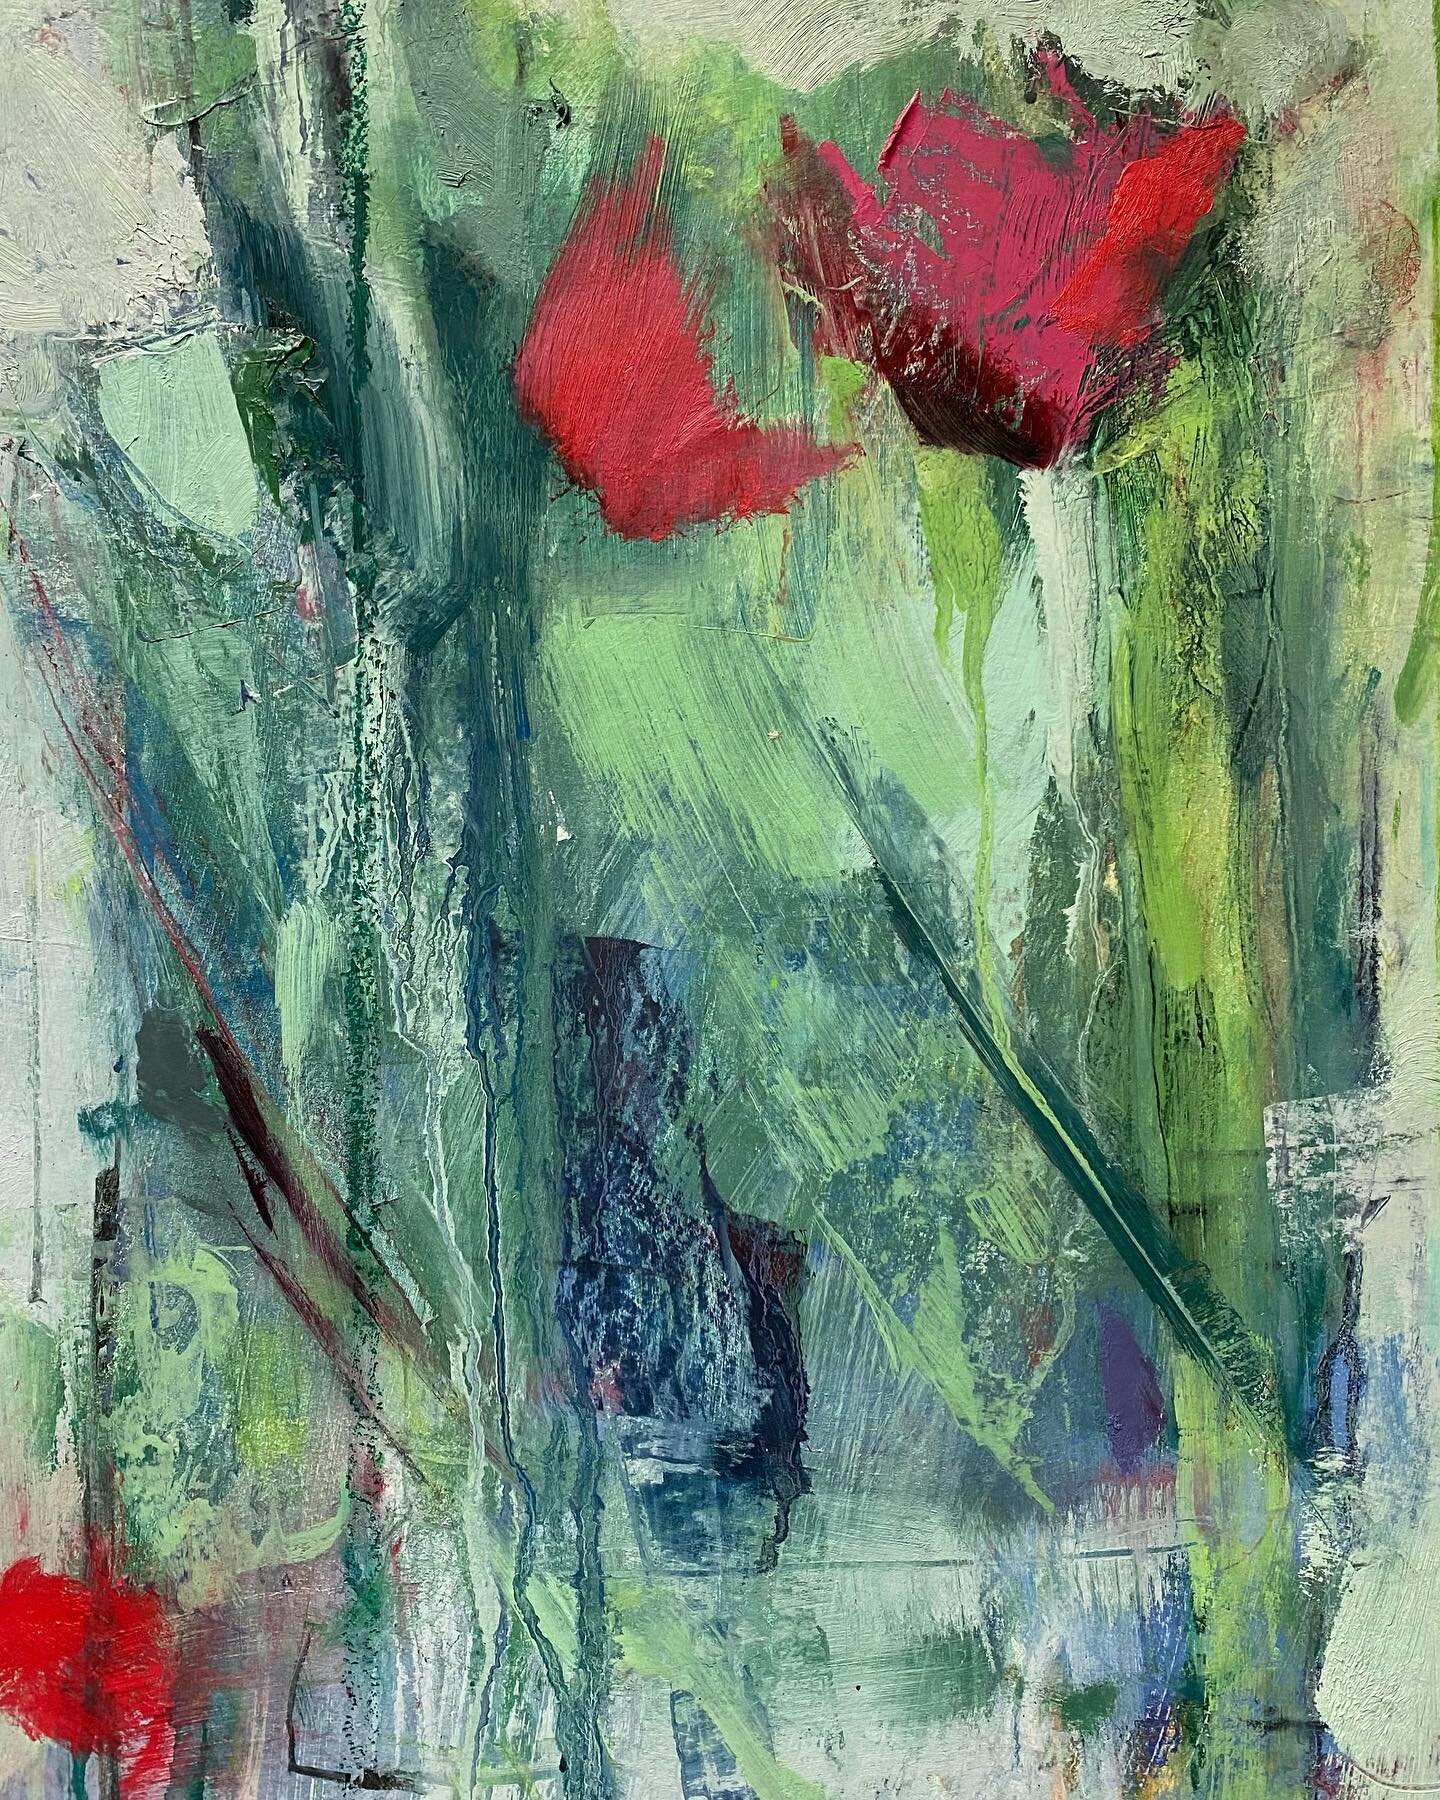 This Garden inspired painting is on show @longandryle for another 4 days in my exhibition #closetohome  #scarletpoppies #julygreens #herbaceousborders #katecorbettwinderart  #longandryle